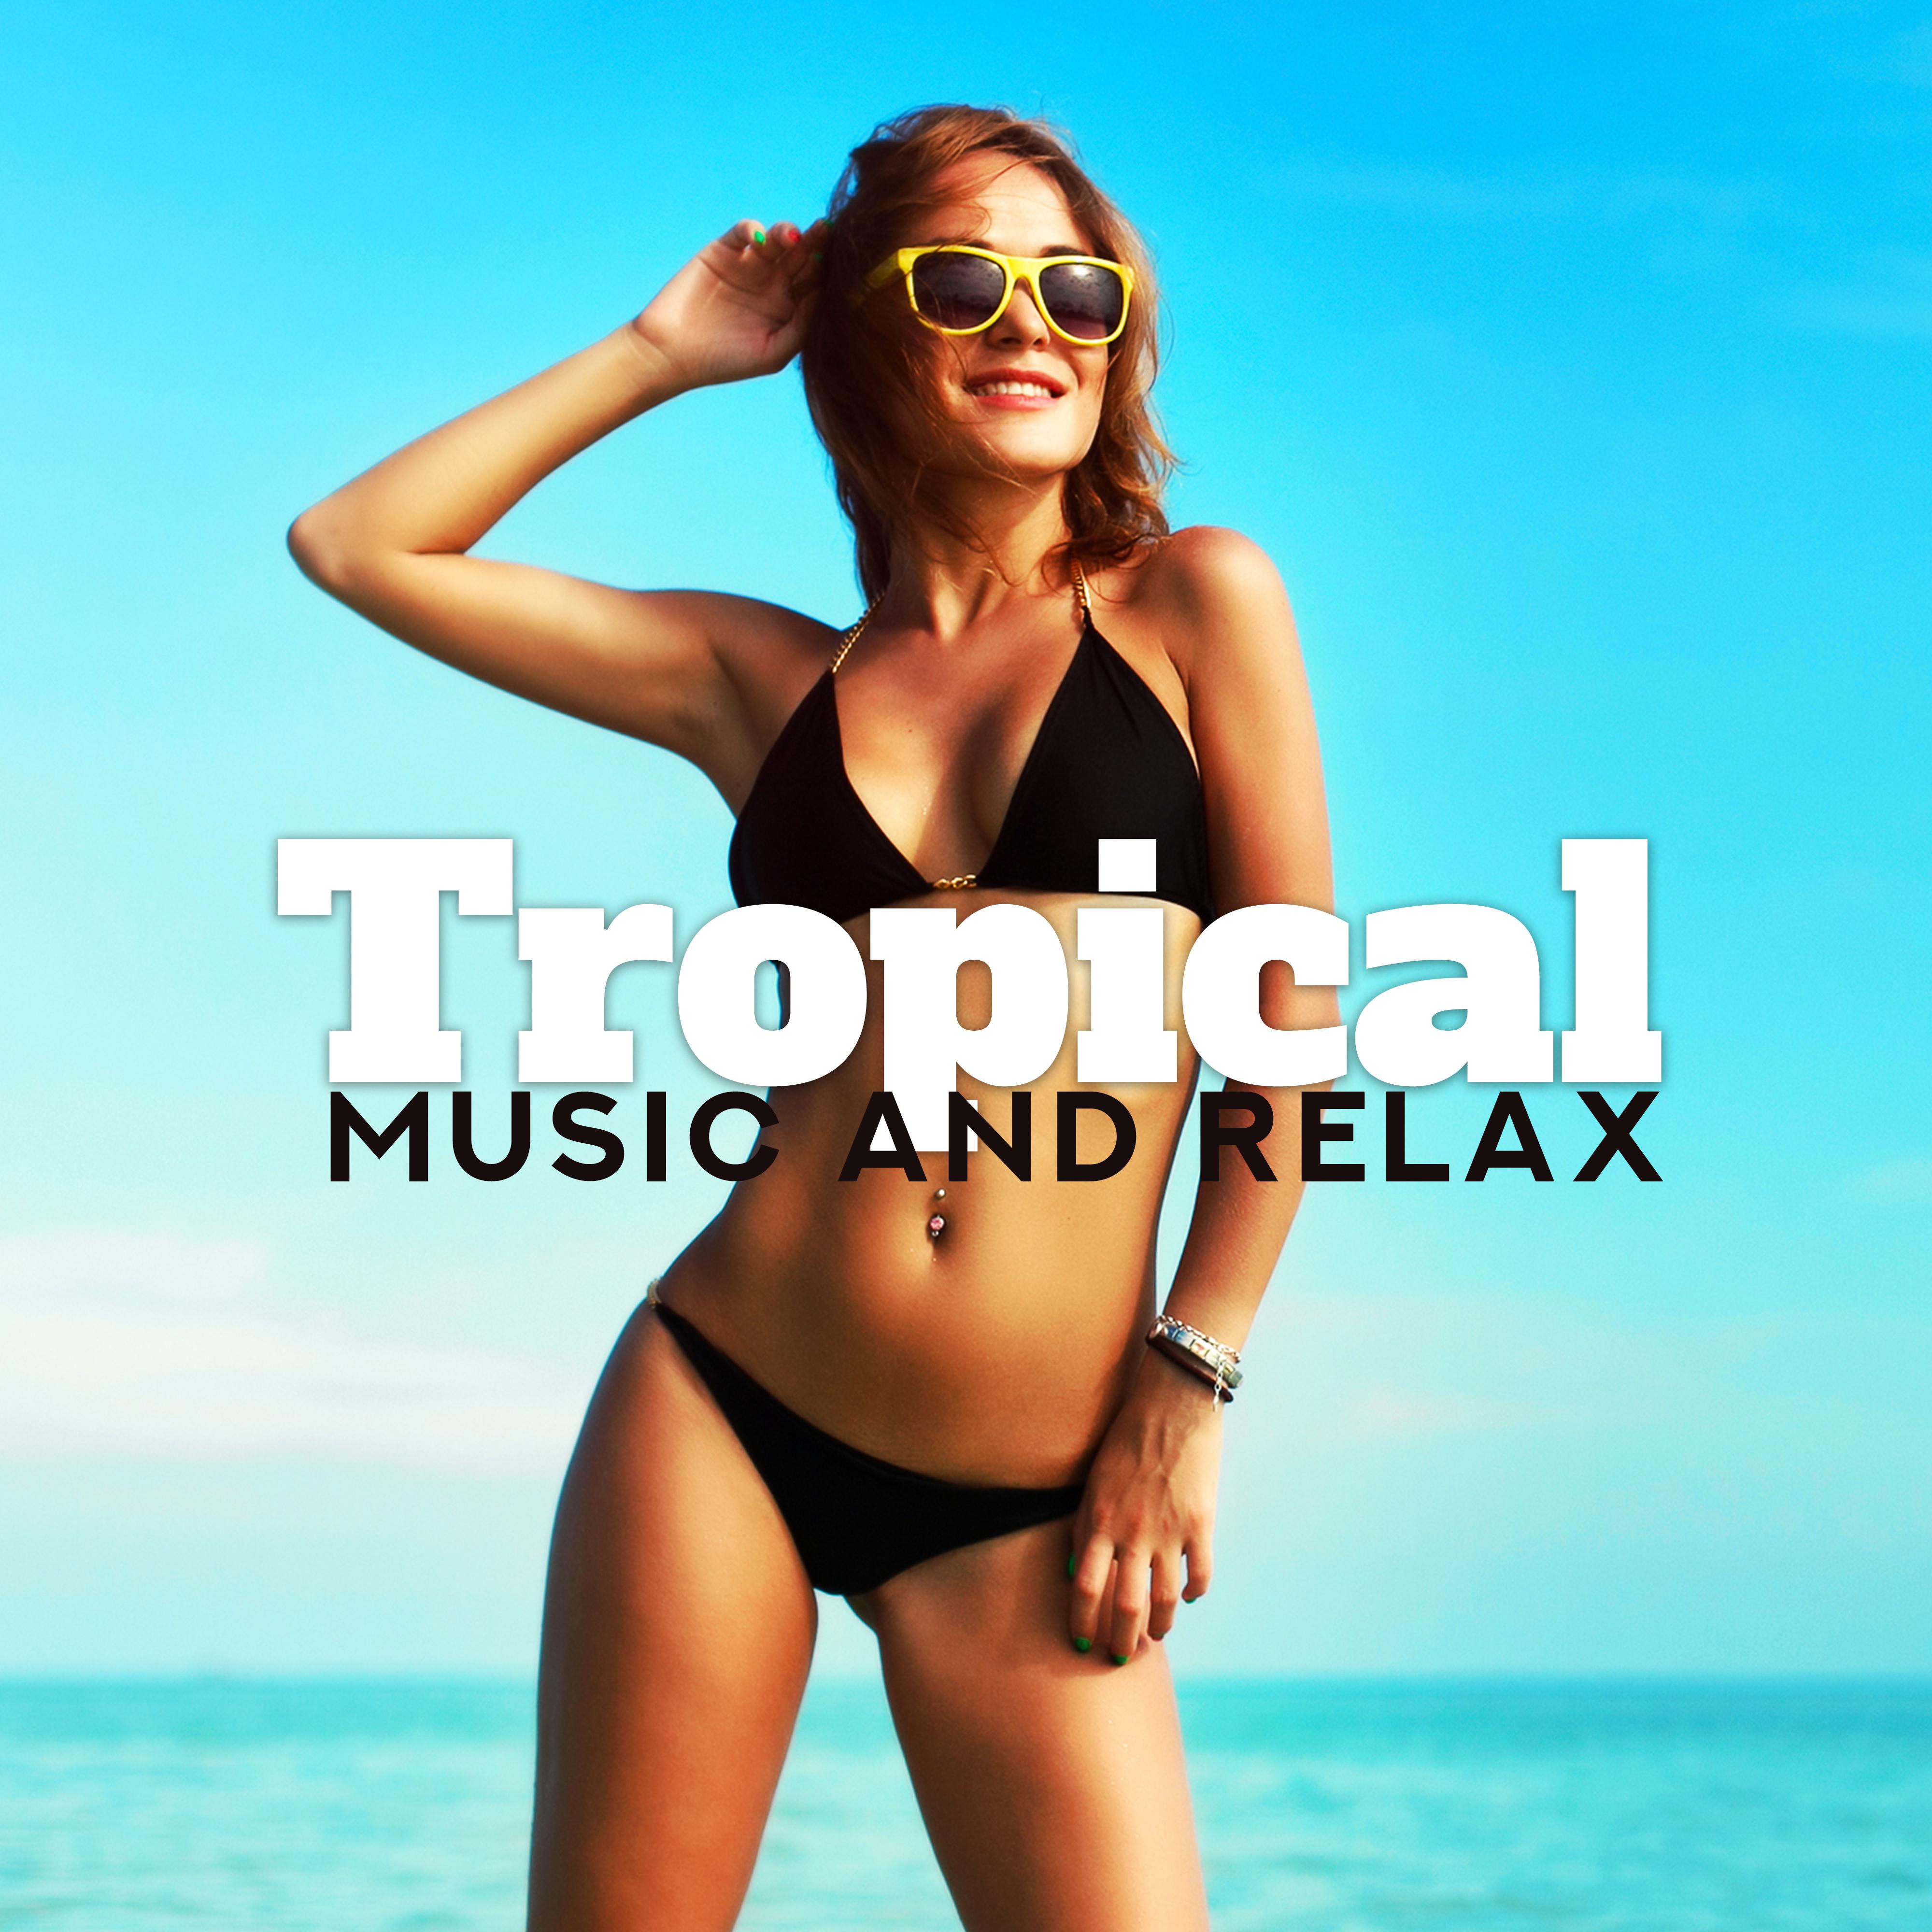 Tropical Music and Relax: Ibiza Lounge, Chill Paradise, Relaxing Chillout, Summer Music 2019, Relax Under Palms, Zen